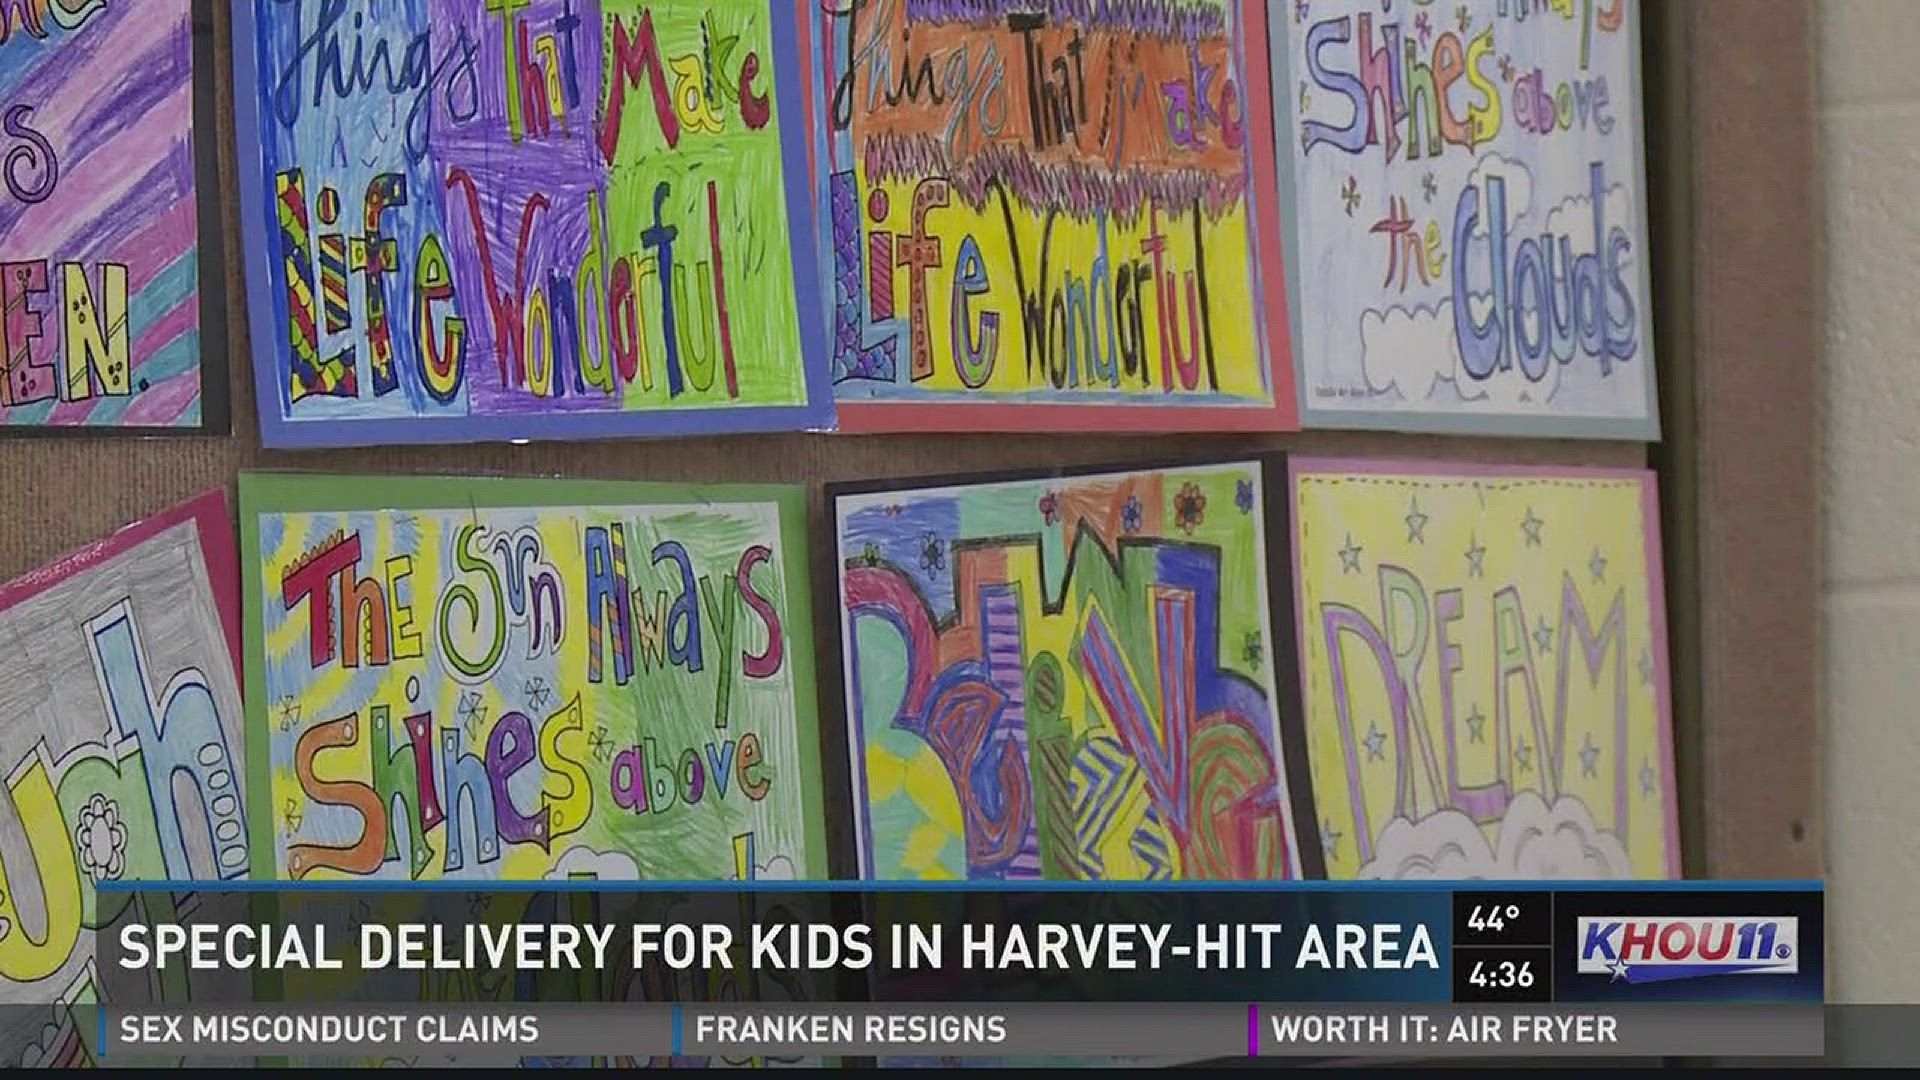 The holidays will be tough for many Houston-area families because of Harvey. But a special delivery from school kids in Pennsylvania helped brighten the spirits of some kids in Kingwood.